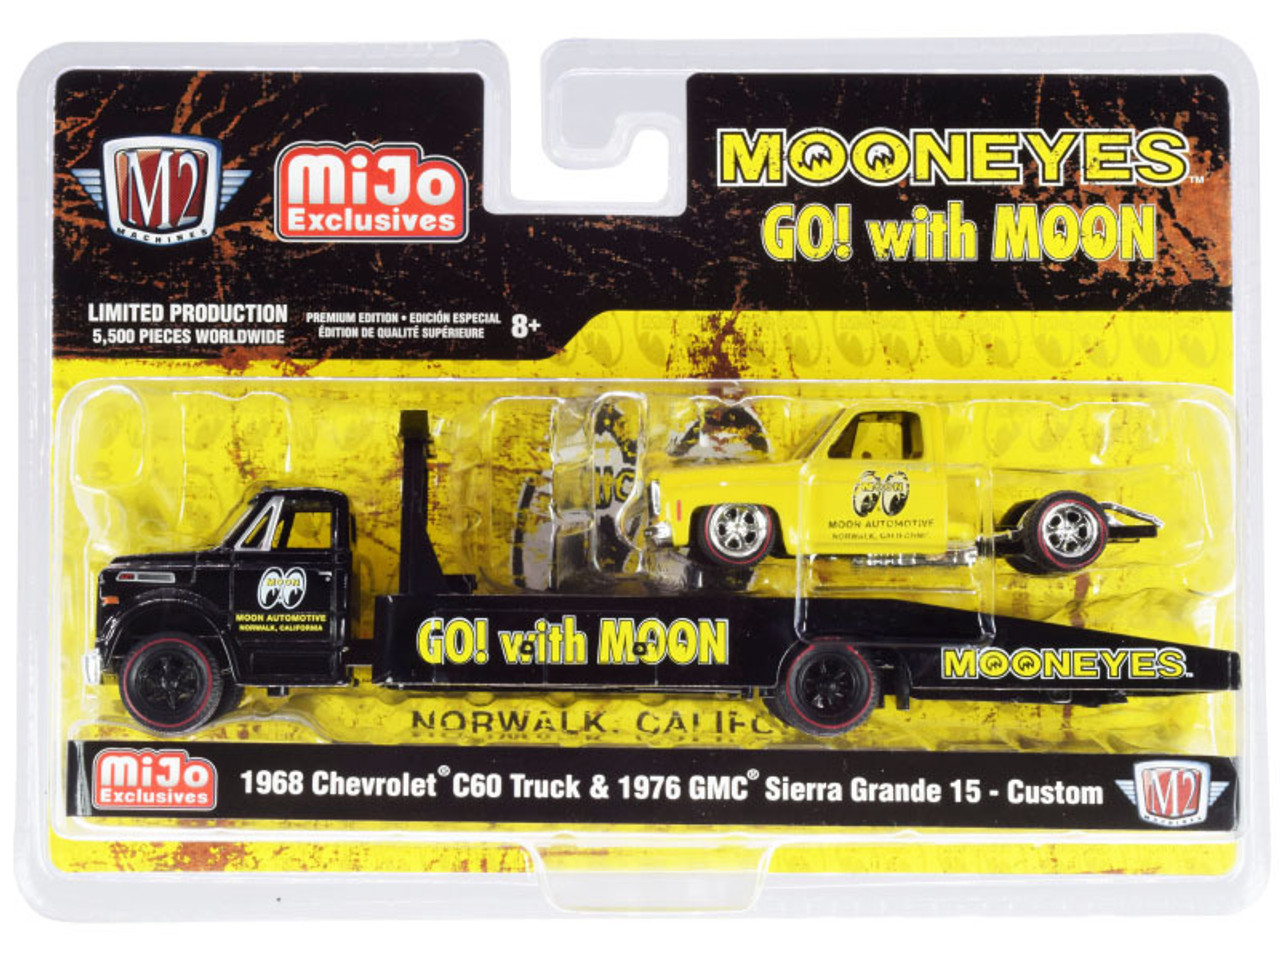 1968 Chevrolet C60 Ramp Truck Black and 1976 GMC Sierra Grande 15 Custom Yellow "Mooneyes" Limited Edition to 5500 pieces Worldwide 1/64 Diecast Models by M2 Machines